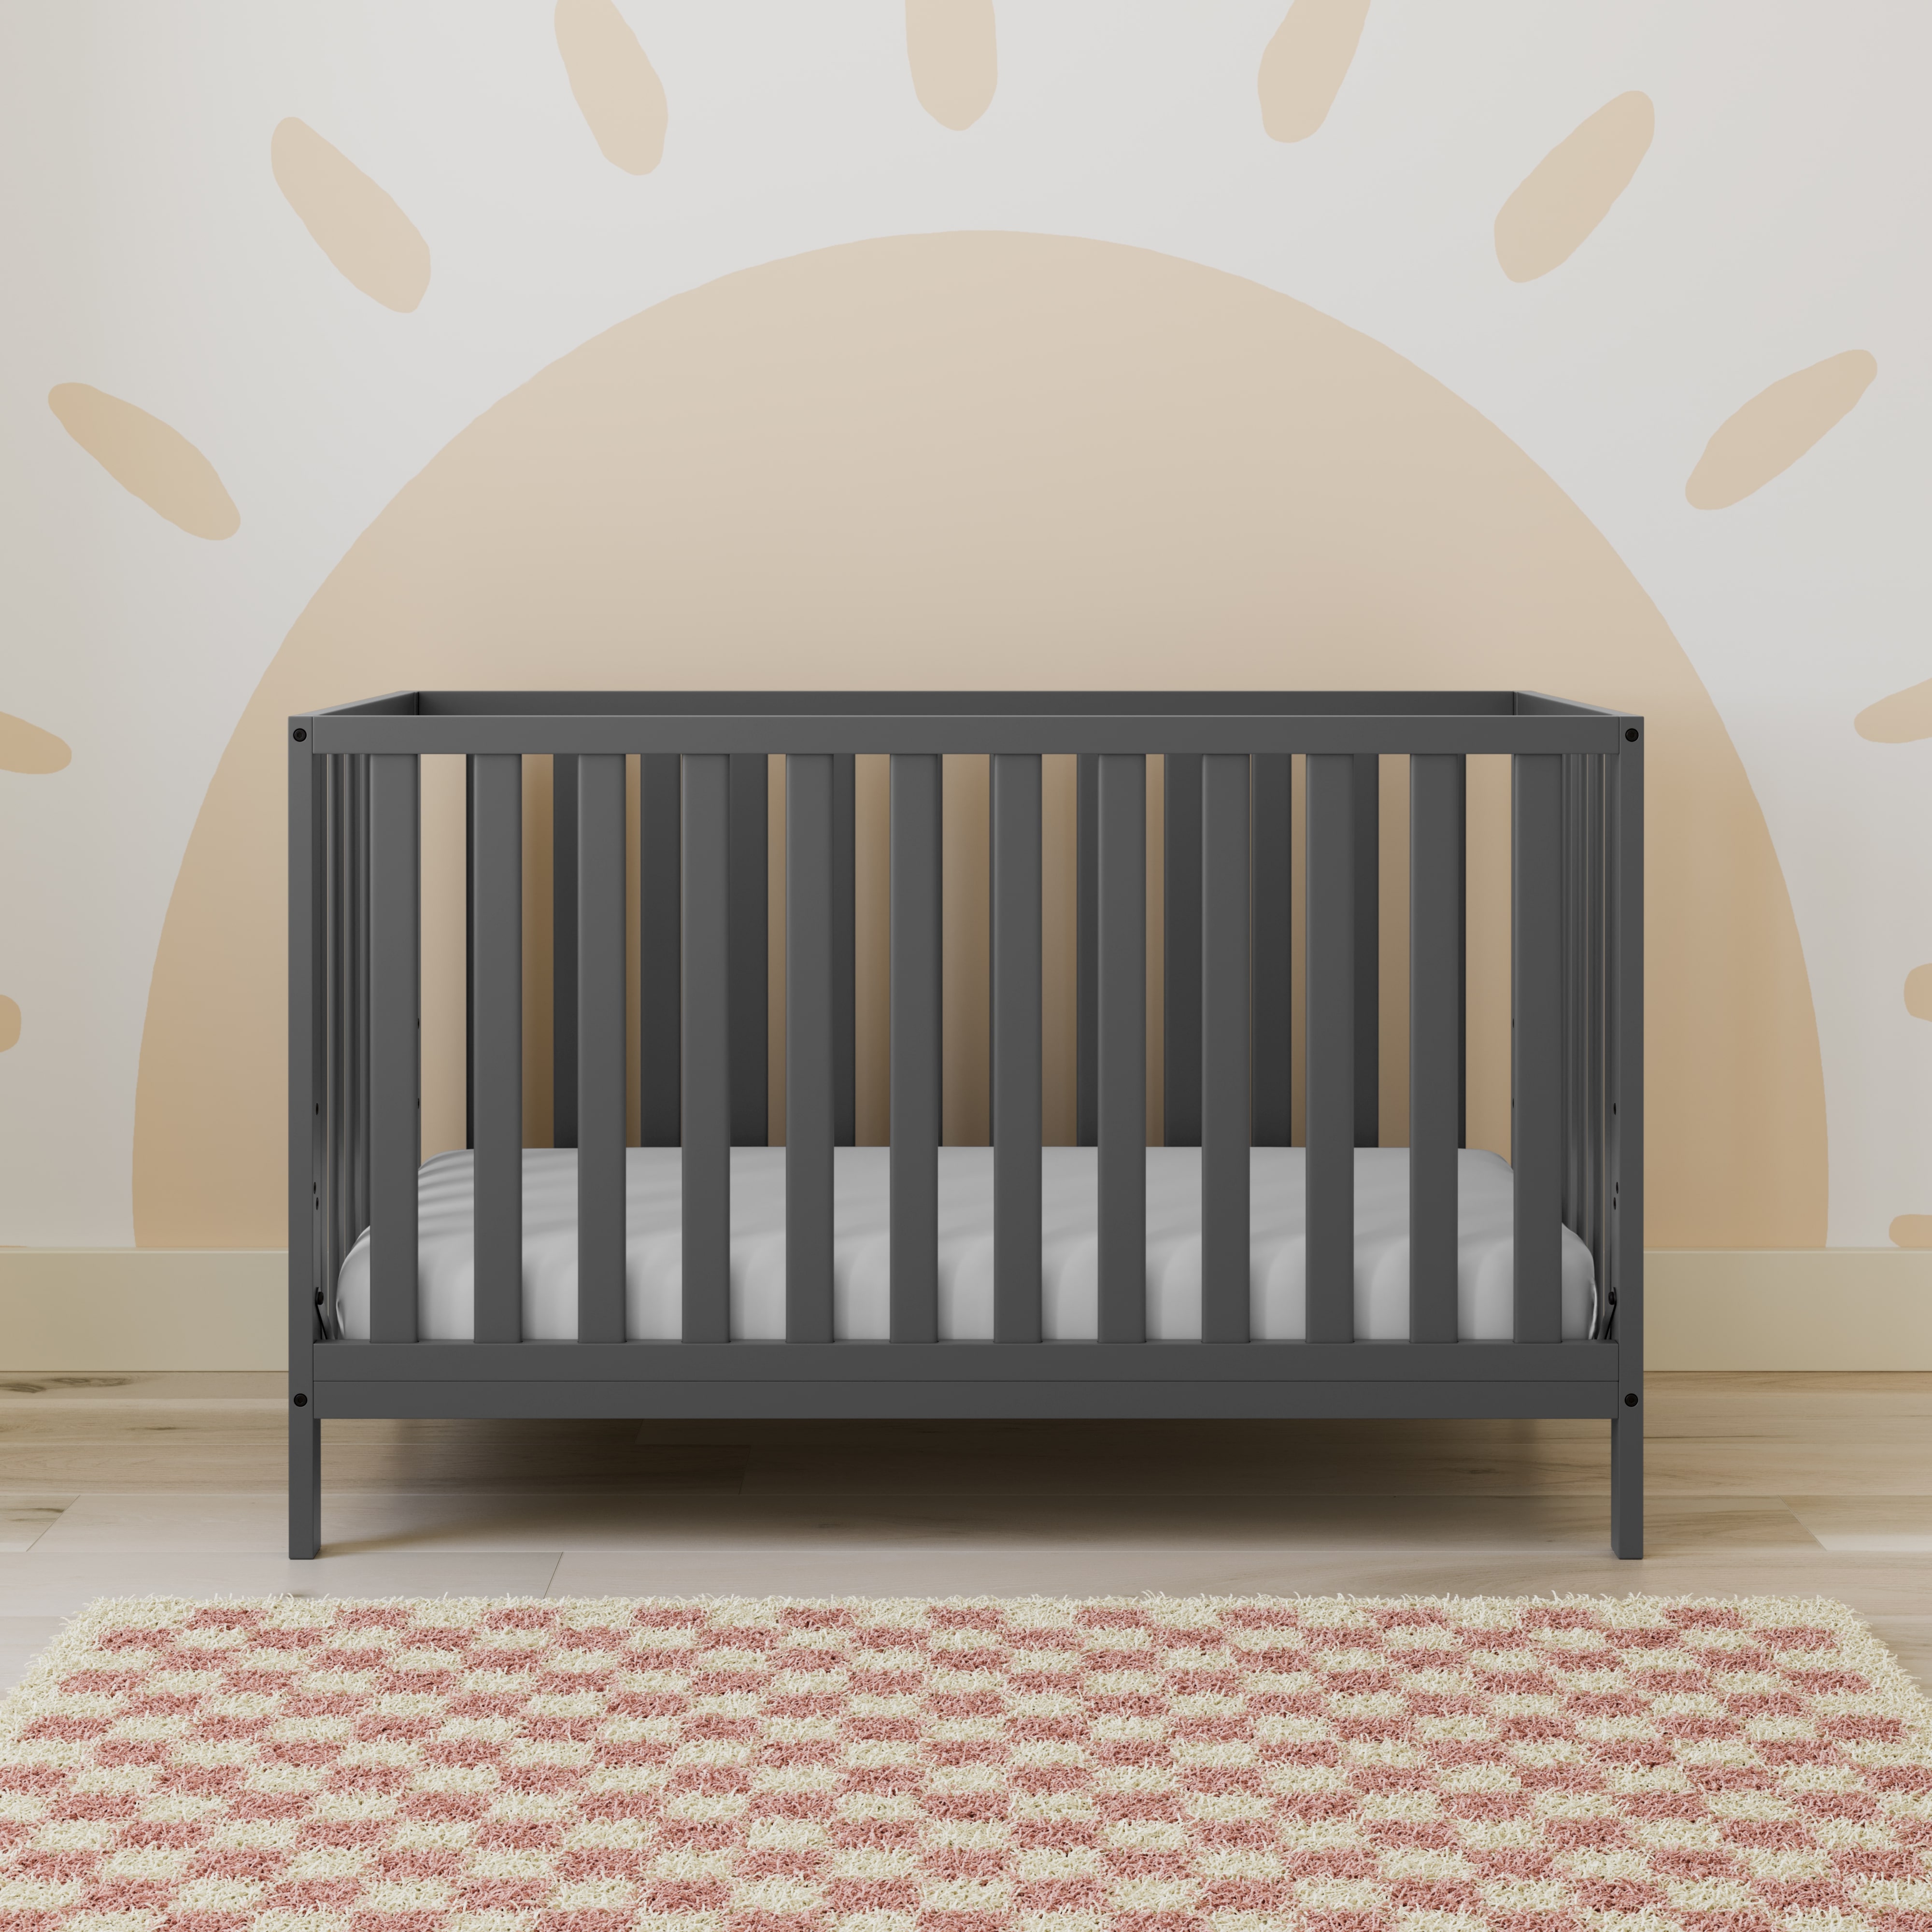 Storkcraft Sunset 4-in-1 Convertible Baby Crib, Gray - image 2 of 7